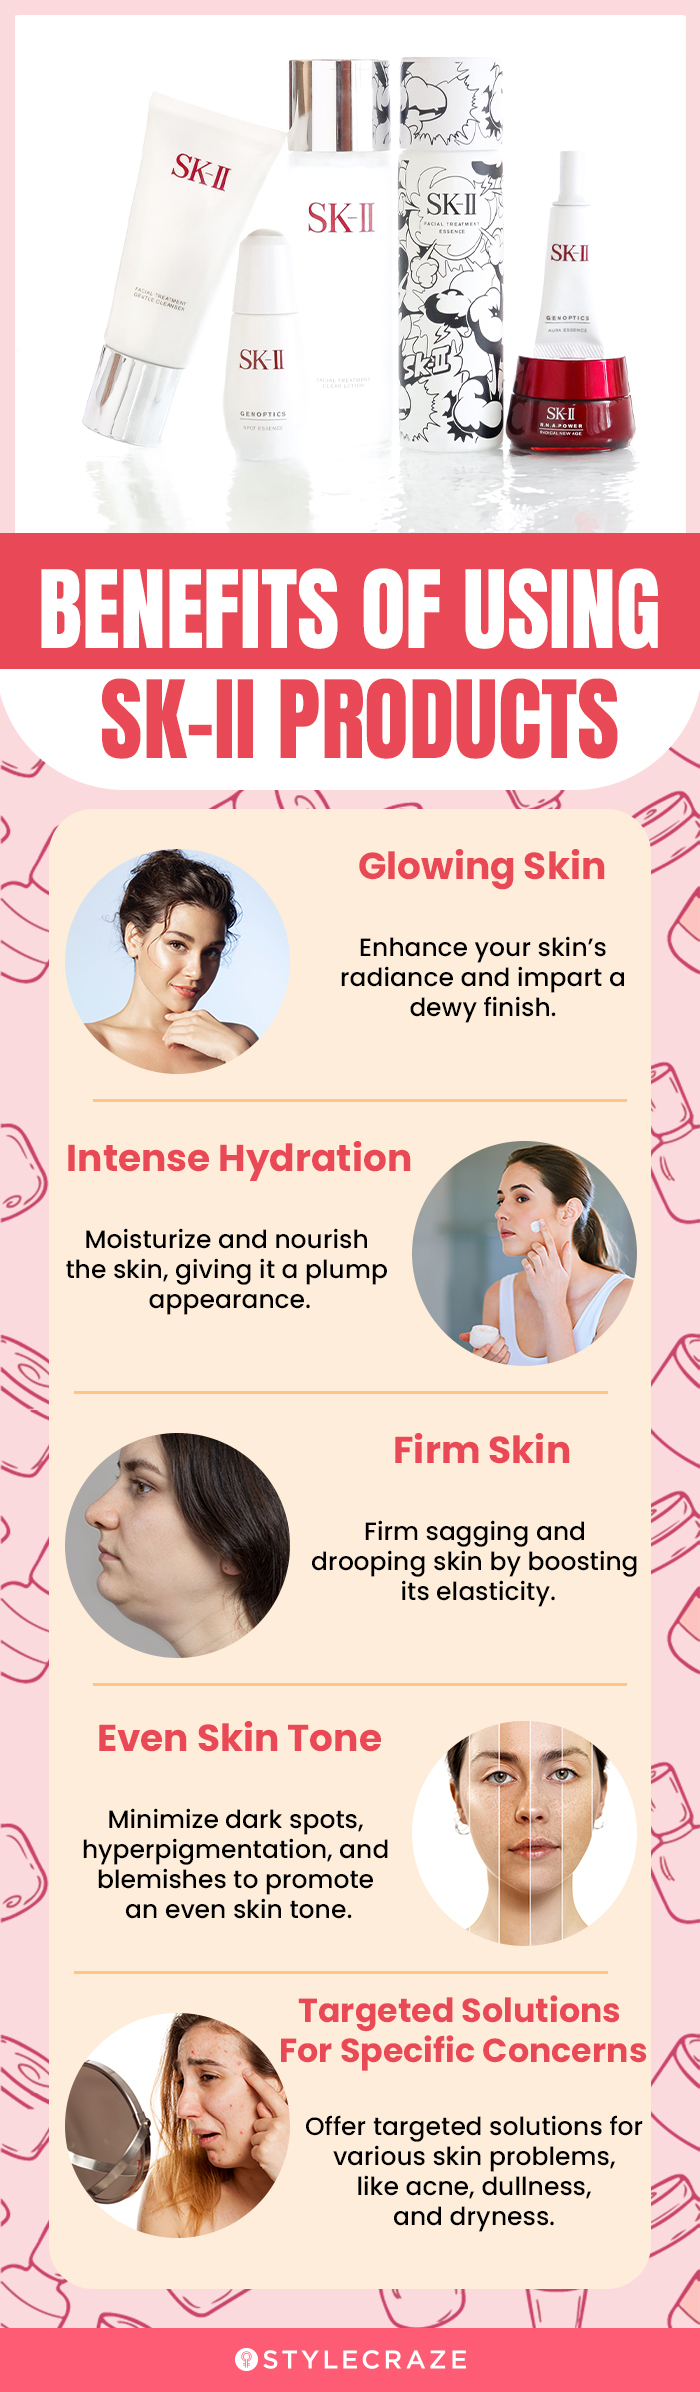 Benefits Of Using SK-II Products (infographic)